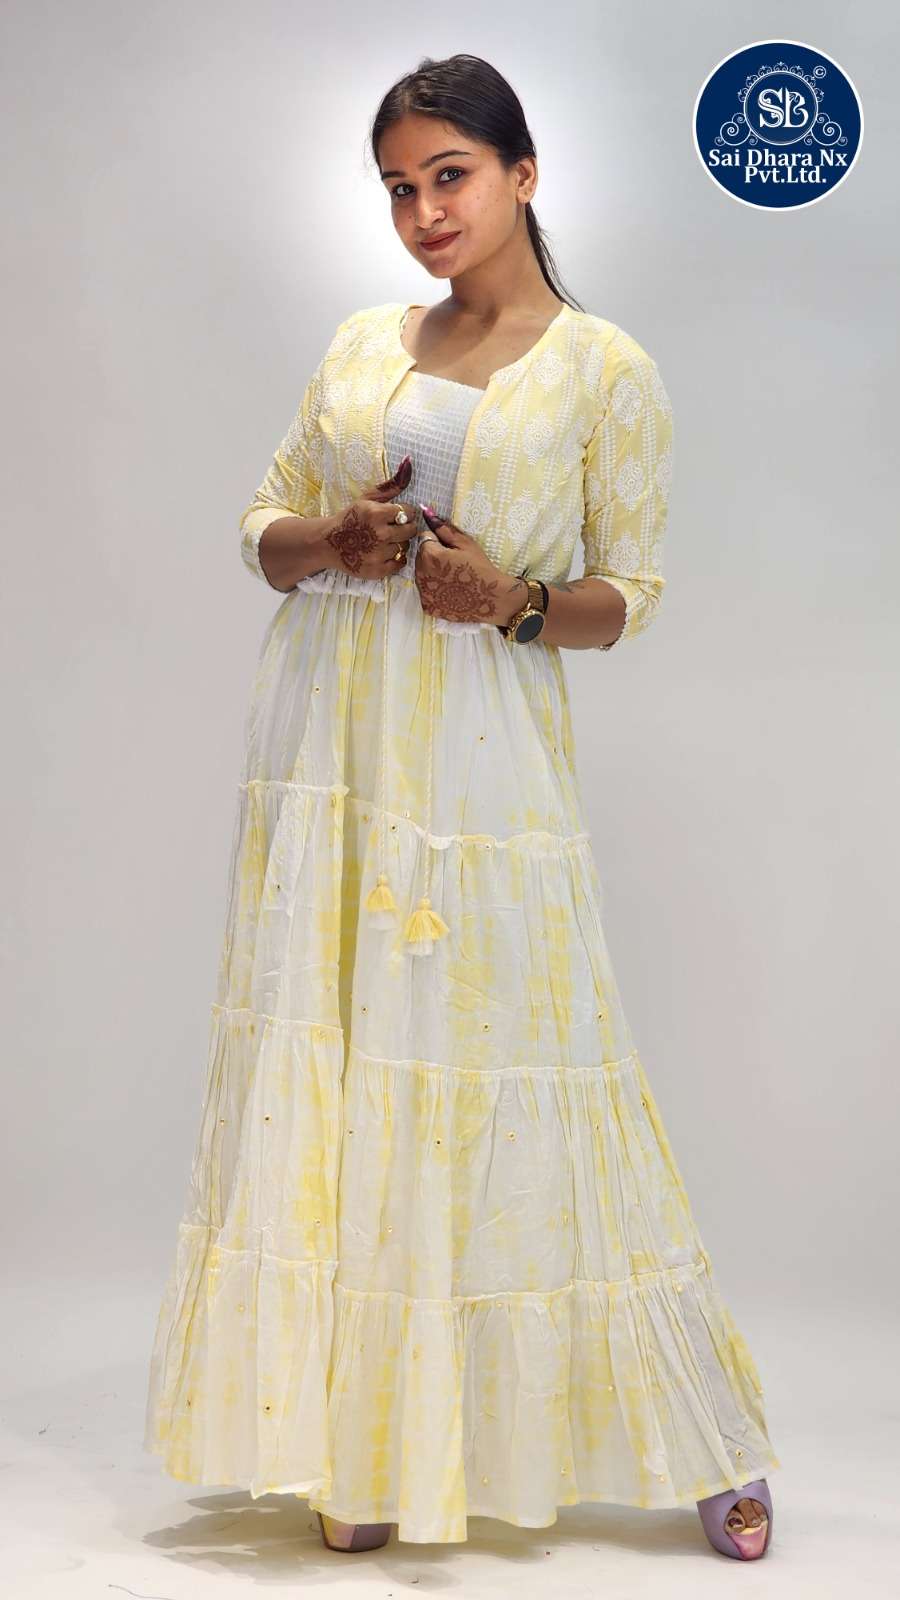 SAIDHARANX PRESENTS PURE COTTON FABRIC HEAVY WORK DESIGNER WHITE & YELLOW GOWN COMBO READYMADE COLLECTION WHOLESALE SHOP IN SURAT - SaiDharaNx